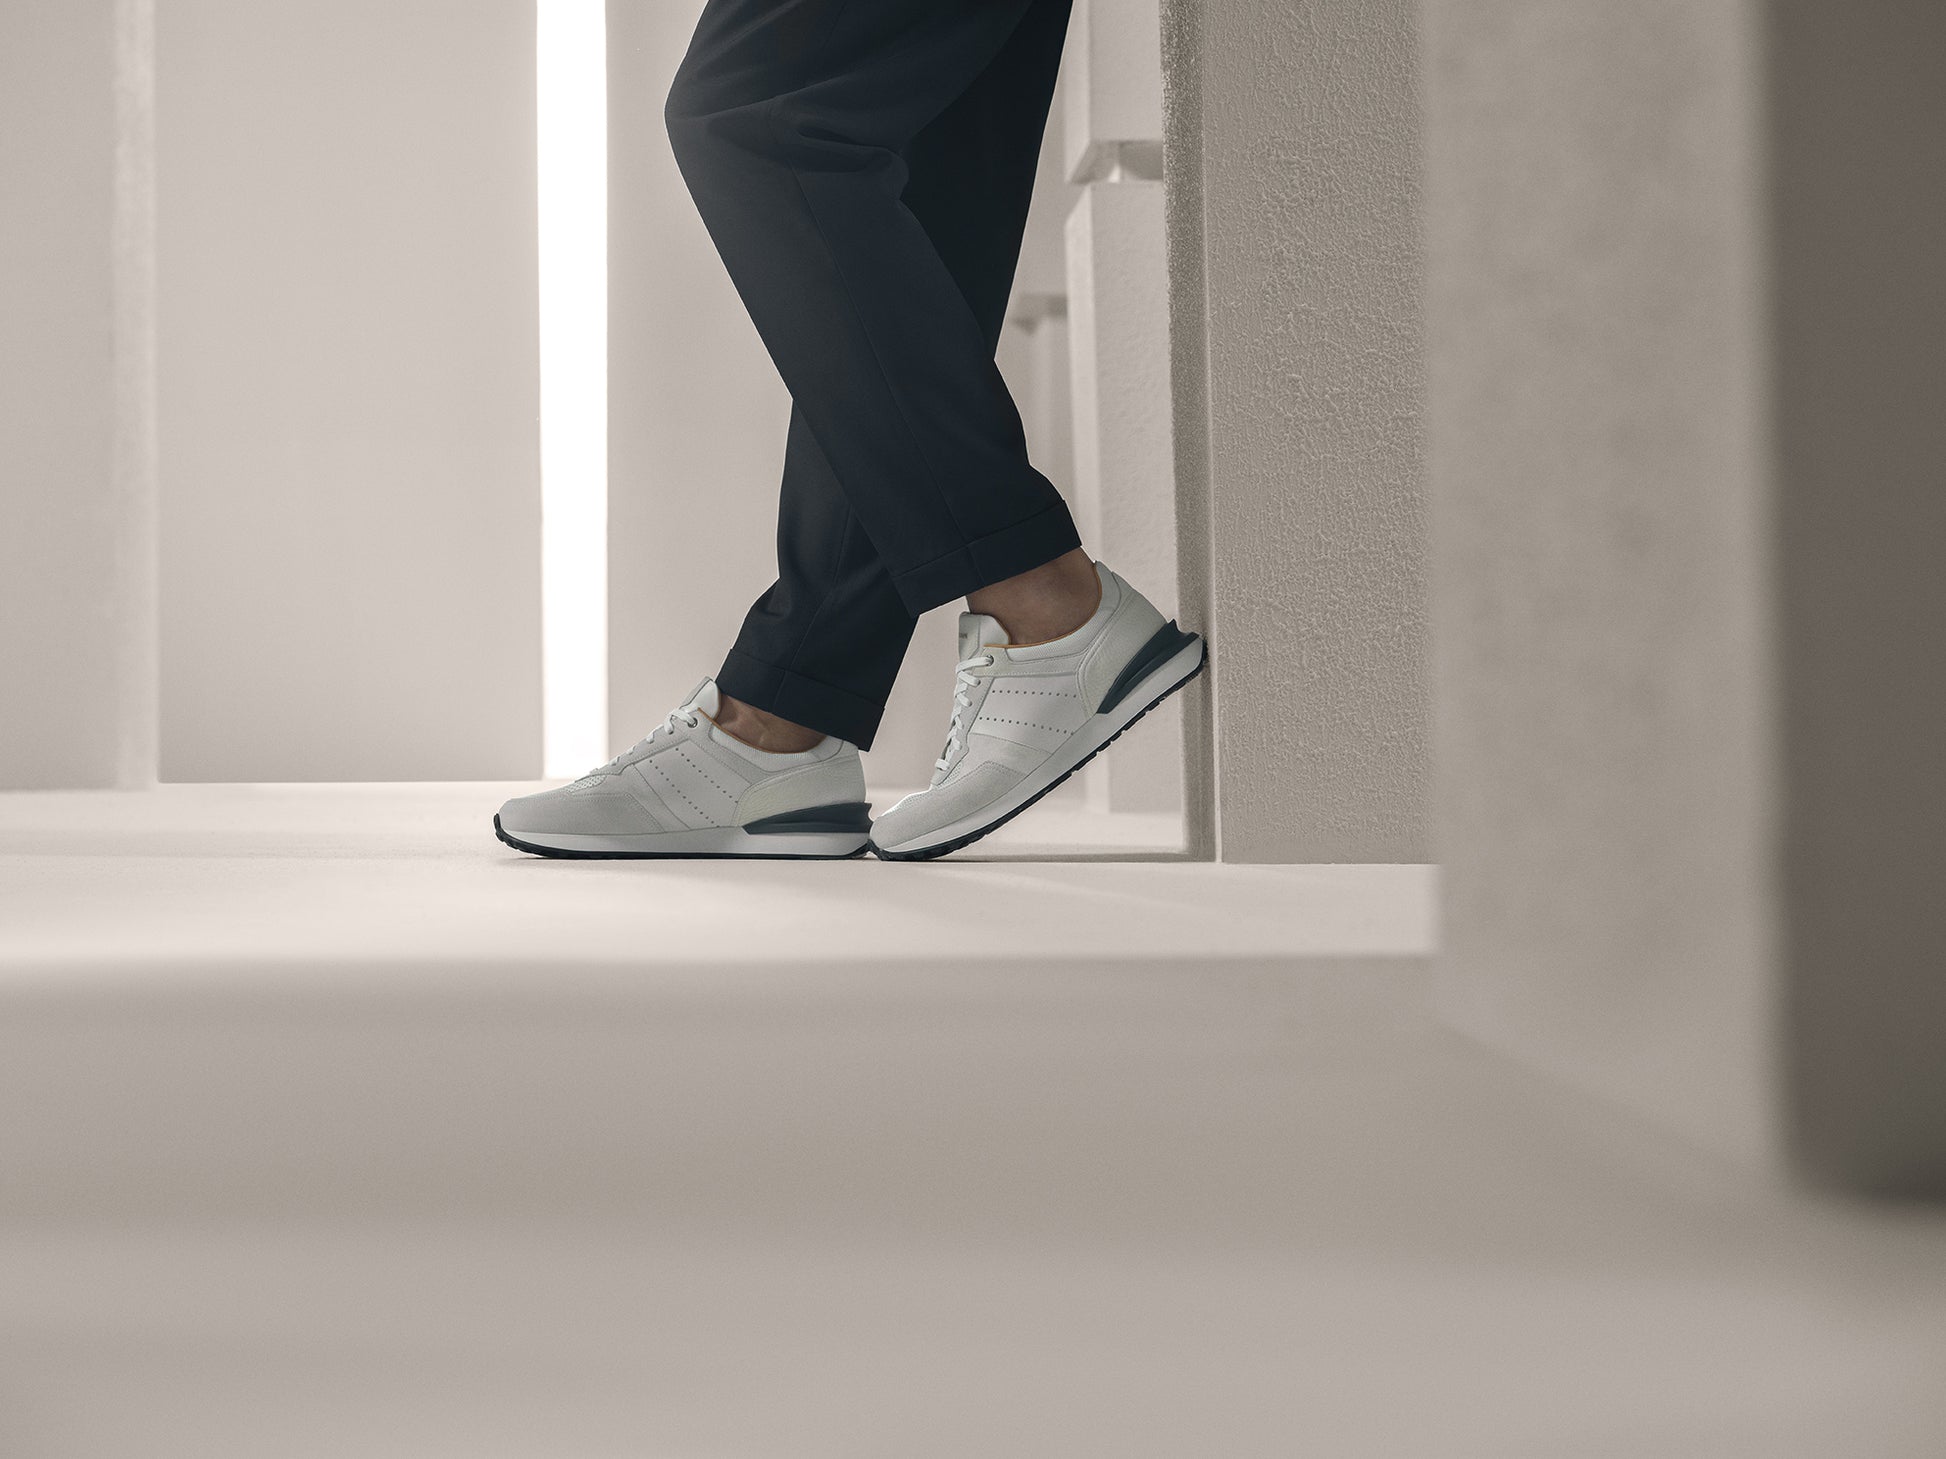 Person wearing white sneakers and black pants standing next to a wall.